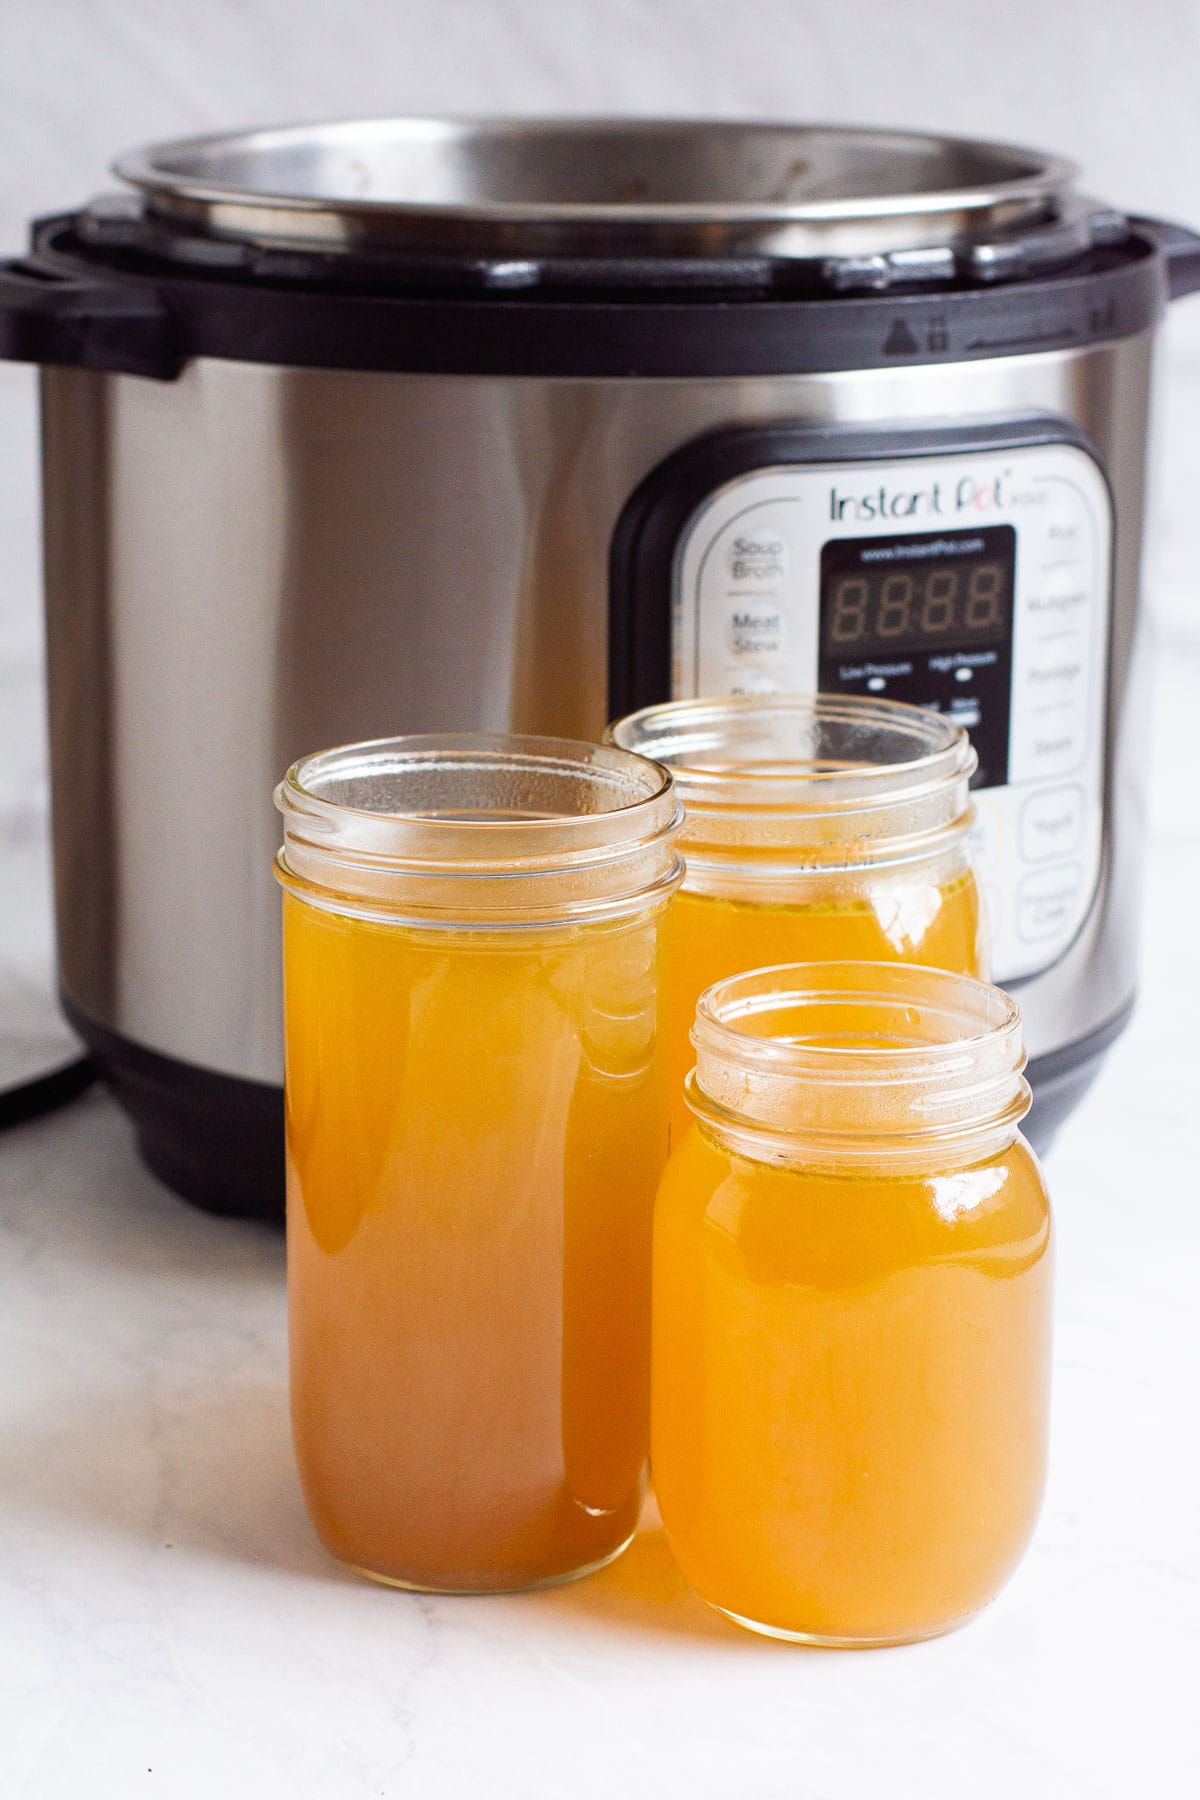 Instant Pot chicken broth in three glass jars with Instant Pot in the background.